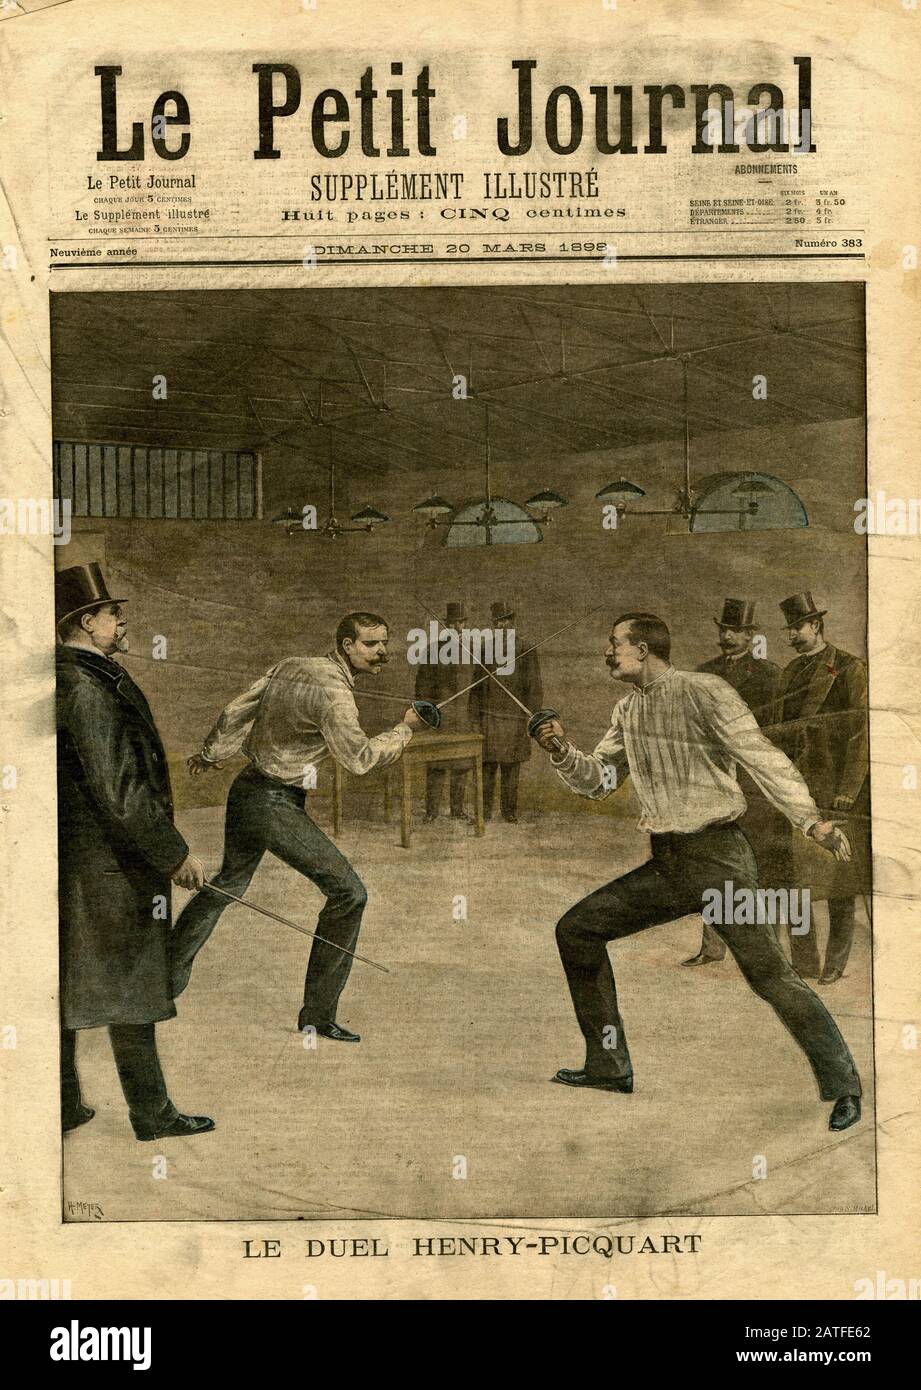 Le Duel Henry - Picquart - The Dreyfus Affair 1894-1906 - Petit Journal 3/20/1898 - French illustrated newspaper Stock Photo